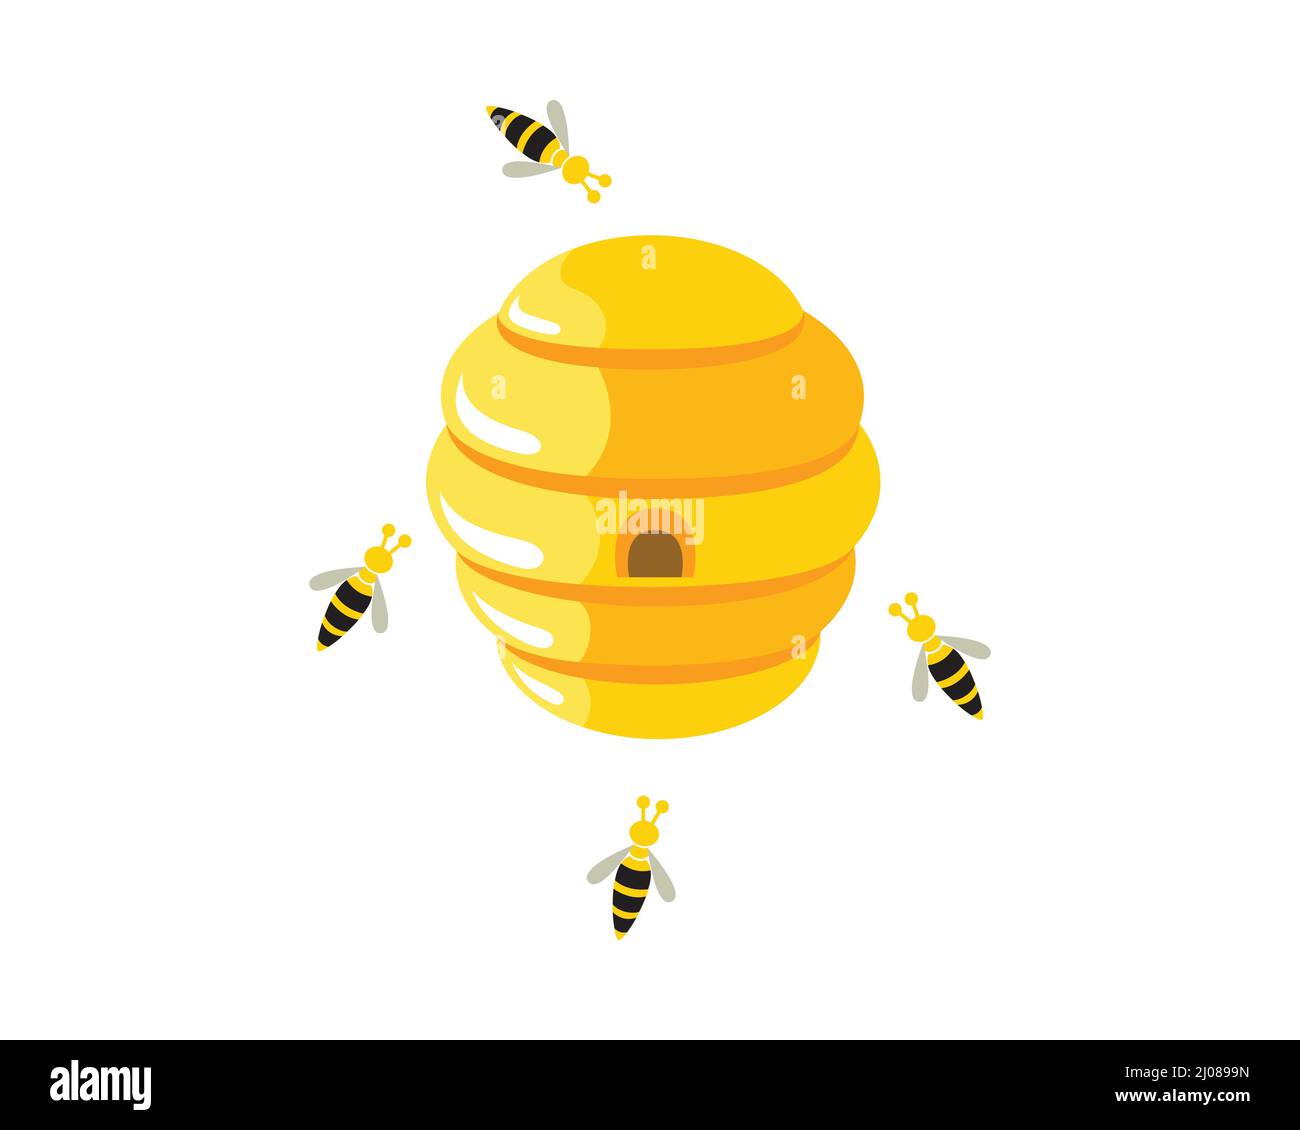 Beehive with Flying Bees Around Illustration Stock Vector